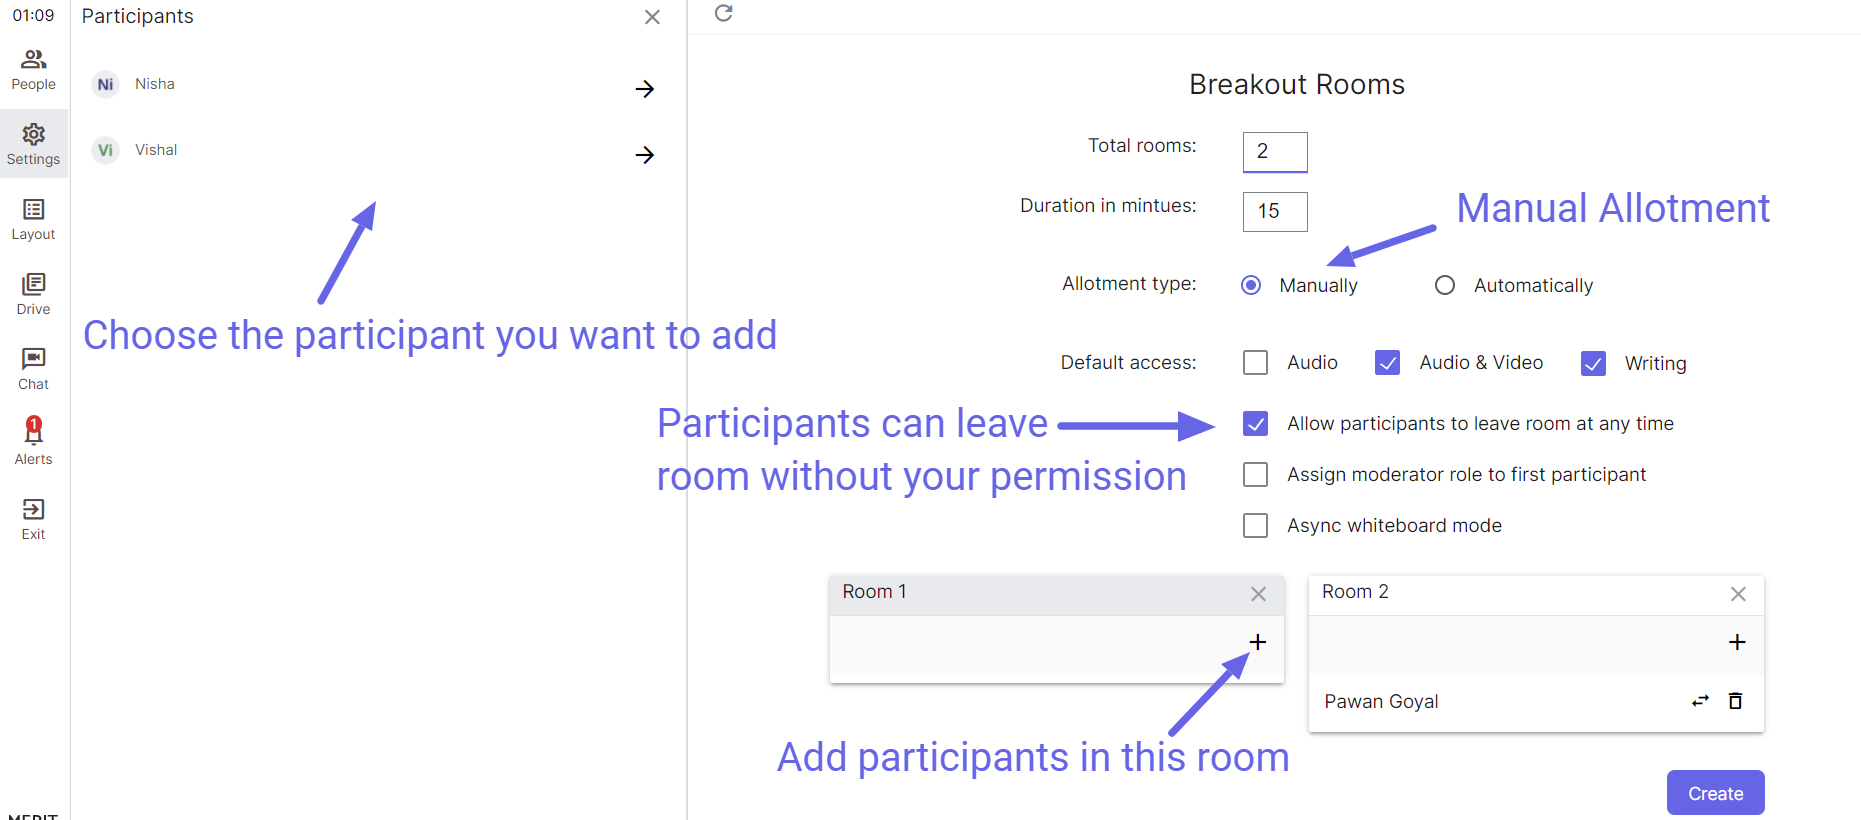 Breakout rooms (2).png